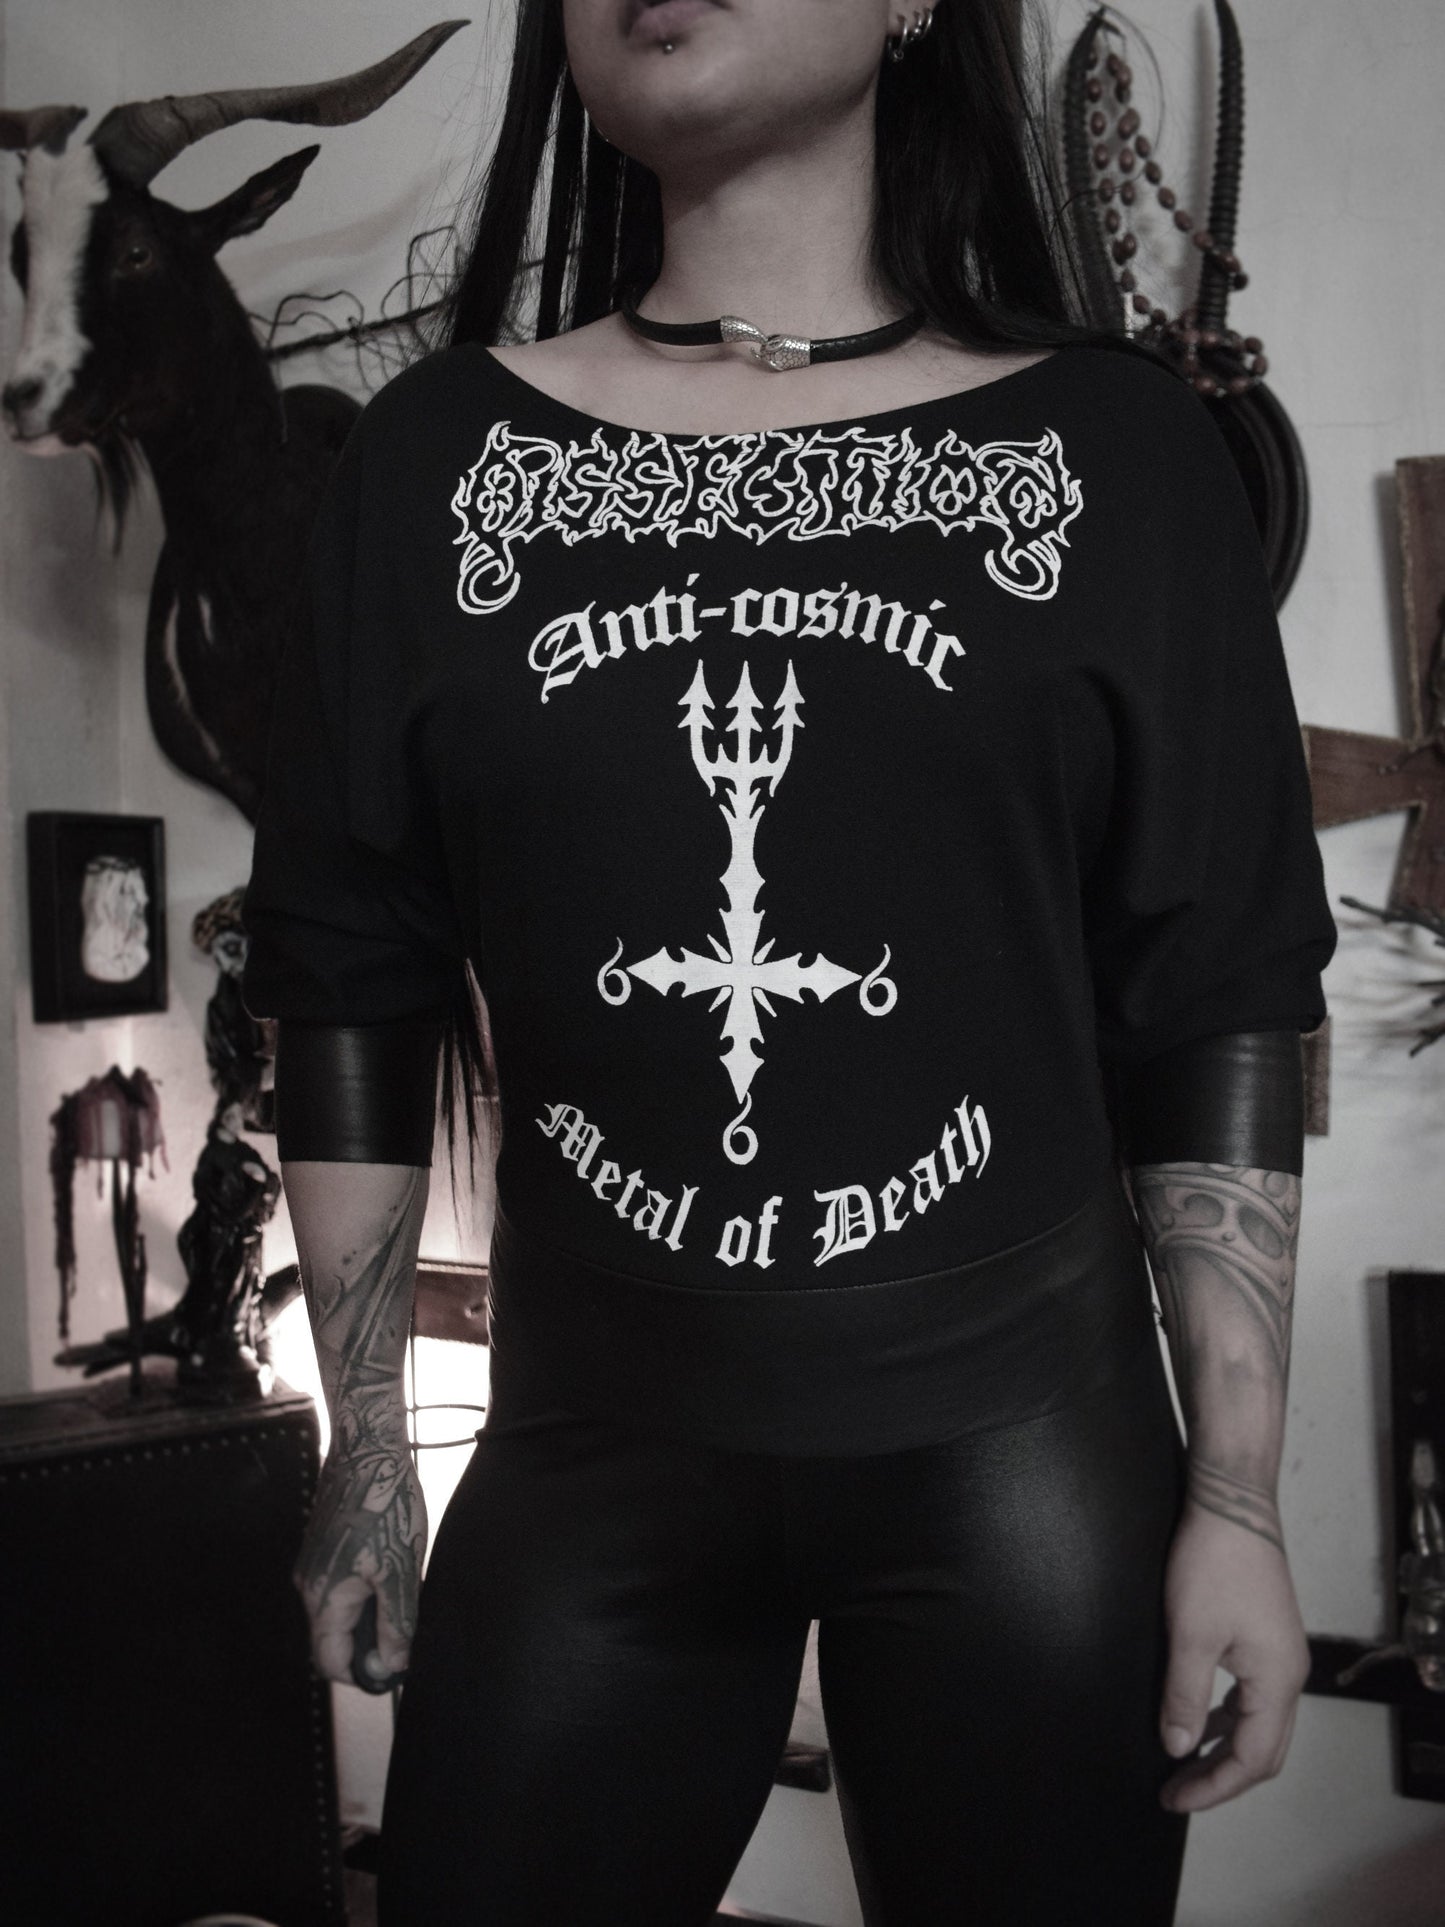 Dissection Anti cosmic shirt Top ⇹ Handmade slouchy batwing shirt ⇹ Dissection Metal of death shirt ⇹ Dissection leather shirt